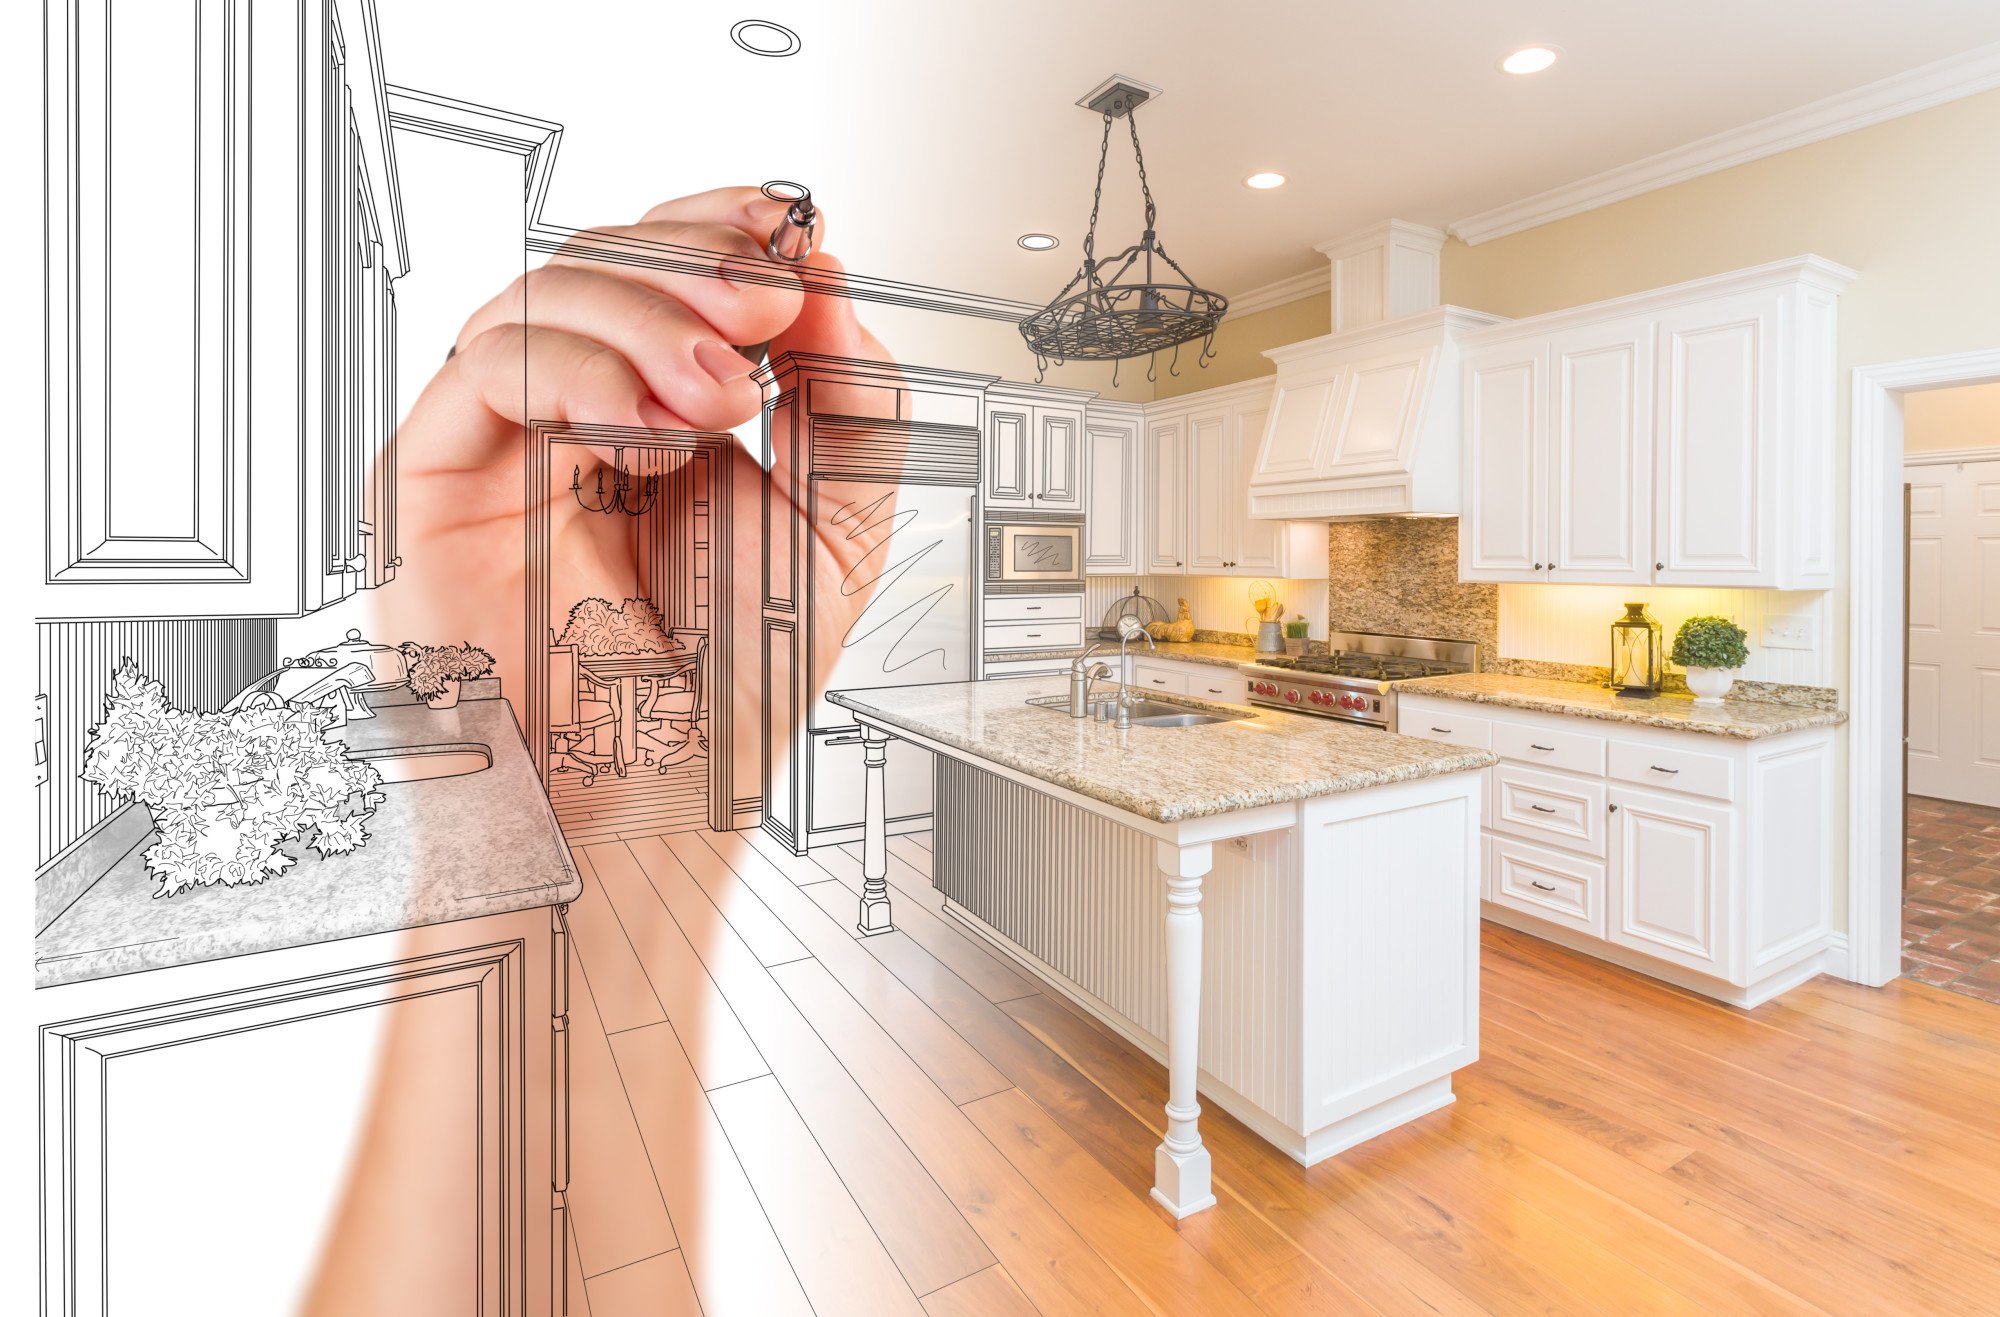 There are several reasons why you may want to transform your kitchen, but how long does a kitchen remodel take? This is what you need to know.